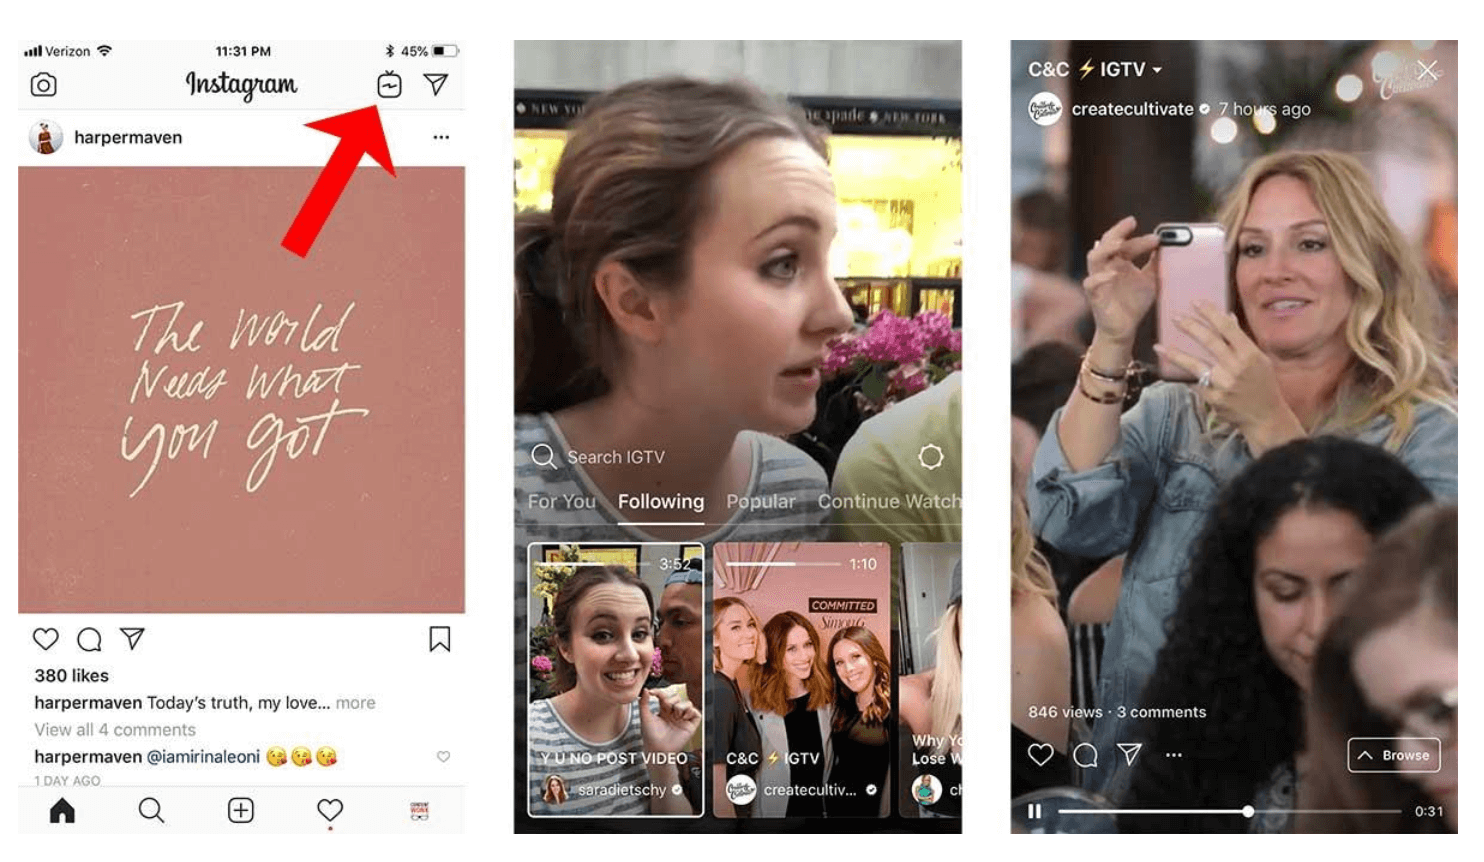 IGTV is new hot feature on Instagram